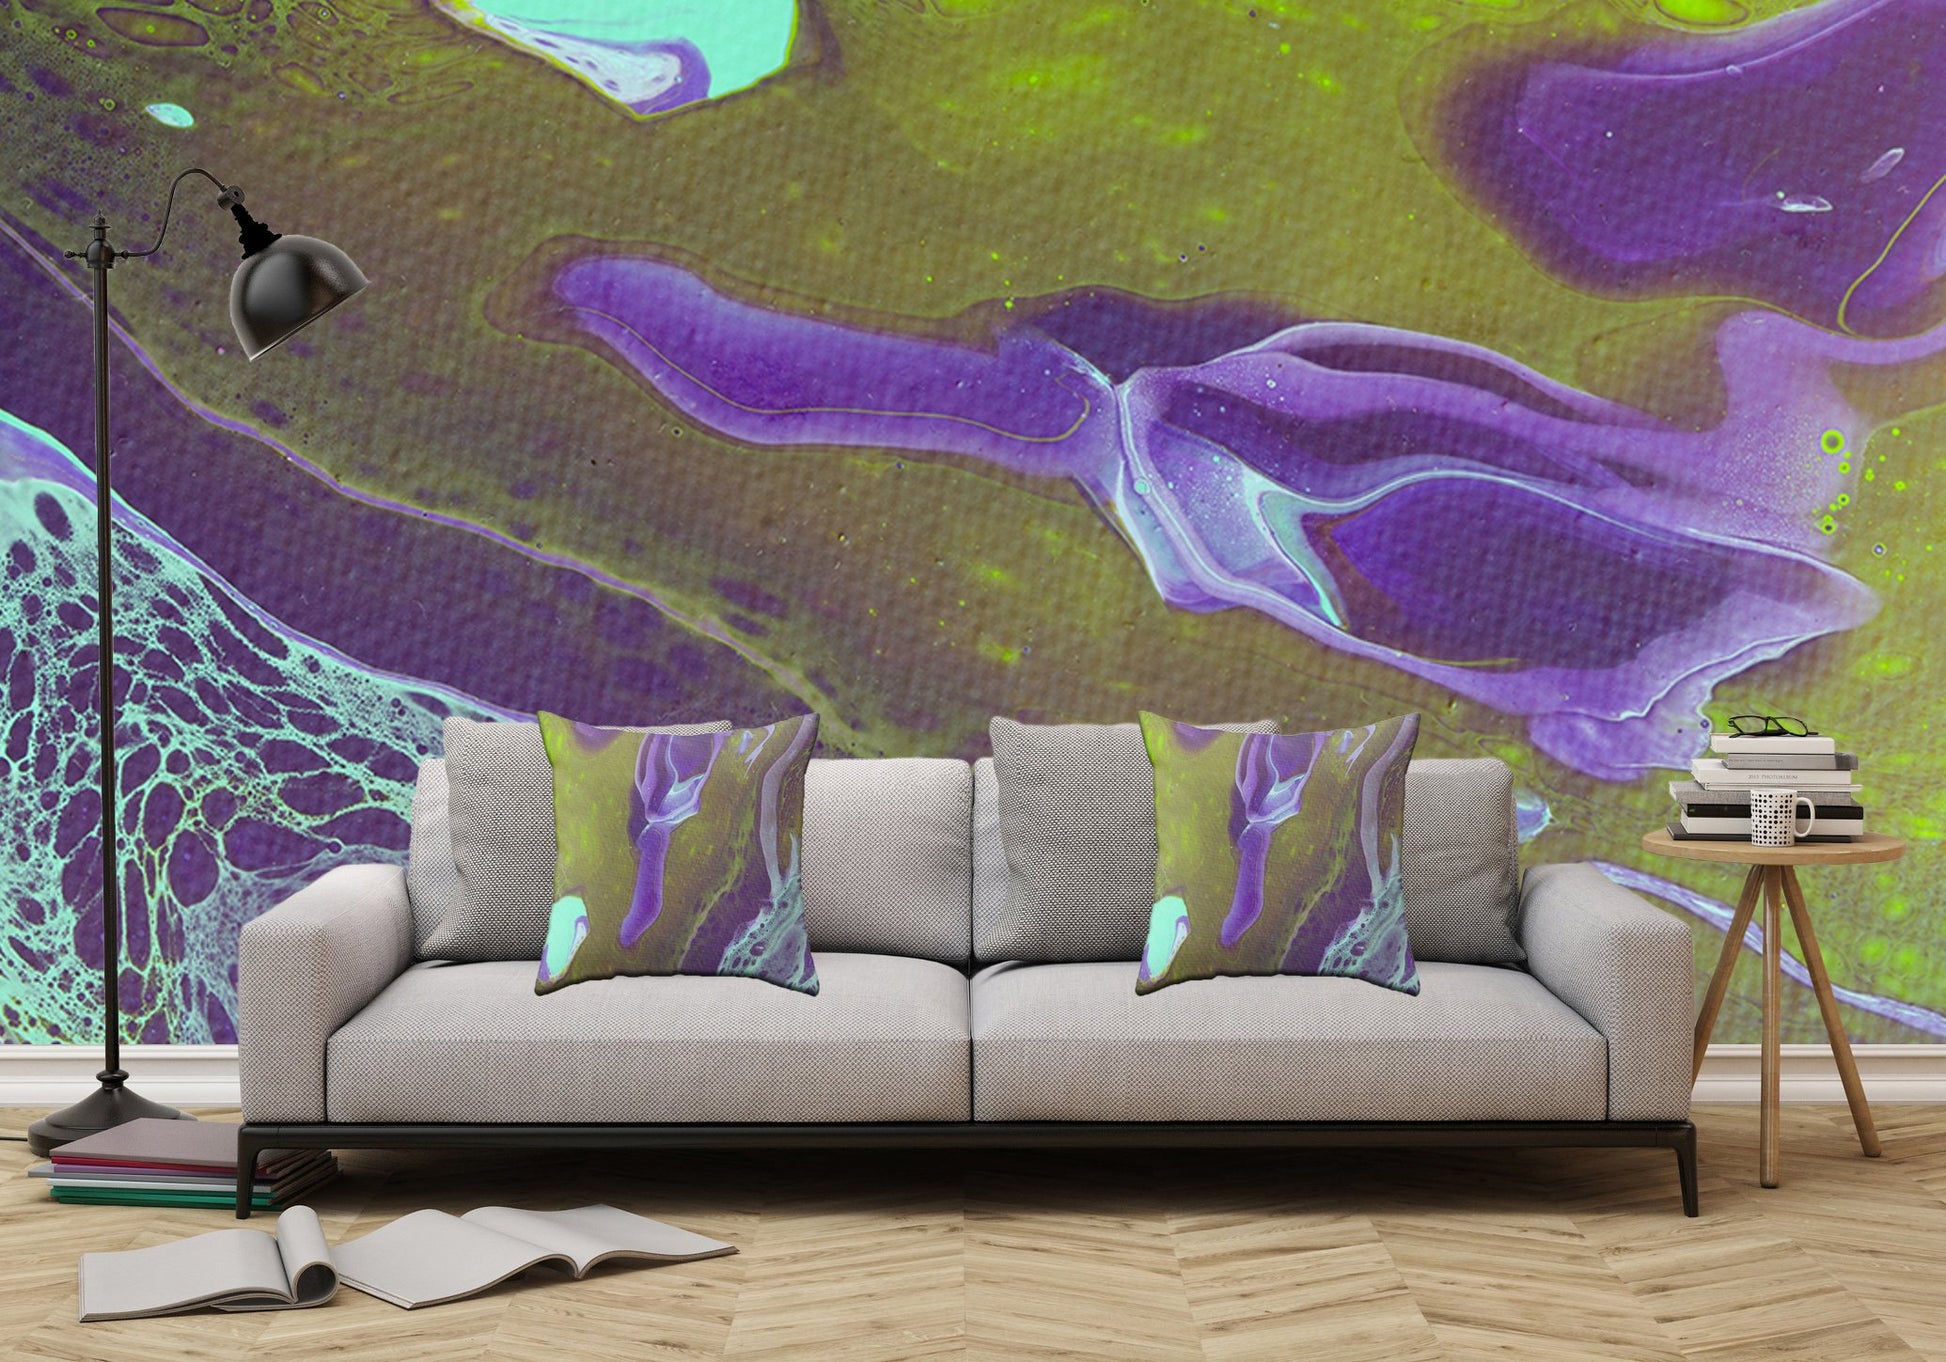 Removable Wall Mural - Wallpaper  Abstract Artwork - Fluid Art Pour 32  - PIPAFINEART